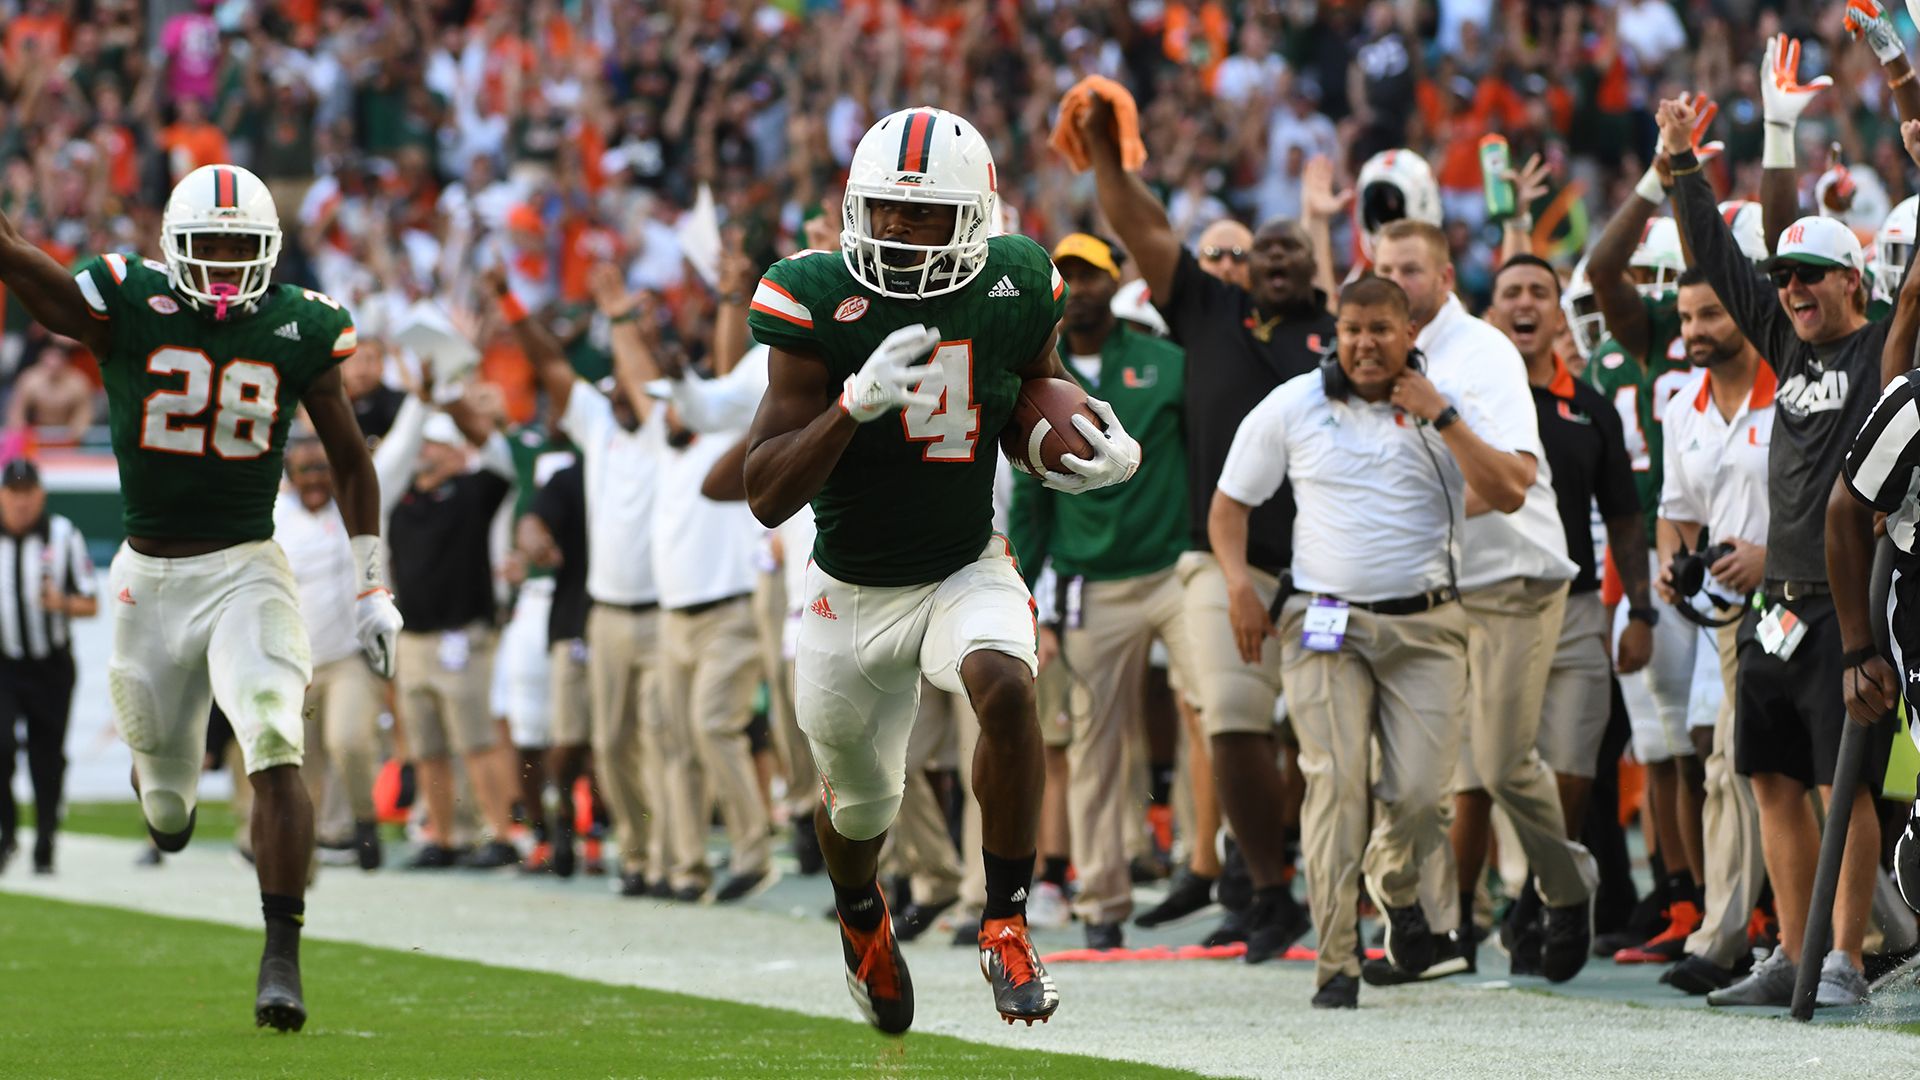 Johnson's Words and Actions Lead Canes to UVA